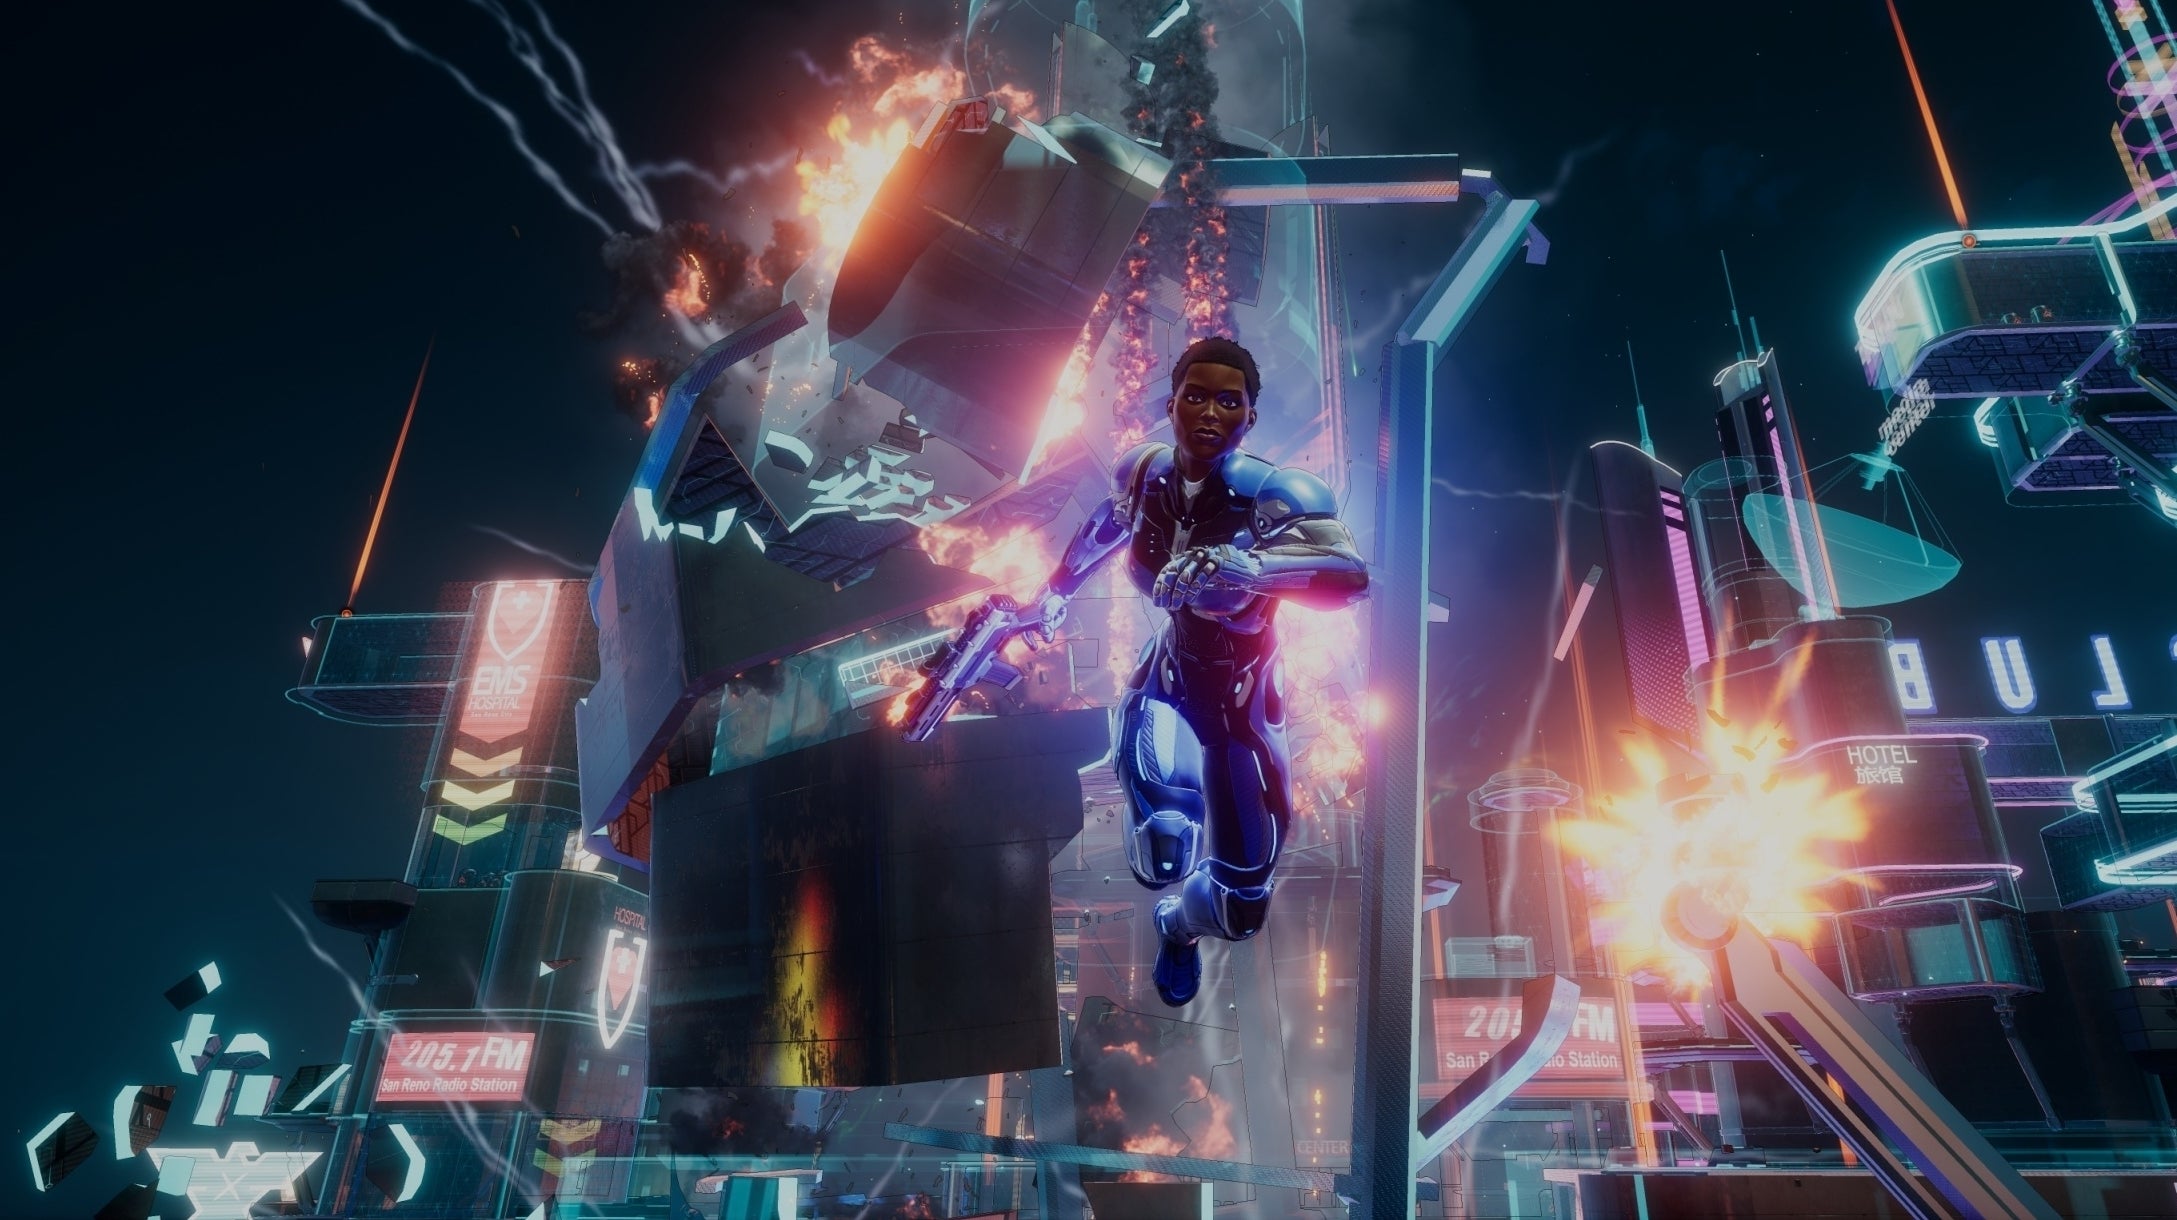 Image for There's a Crackdown 3 multiplayer "technical test" starting tomorrow on Xbox One and PC